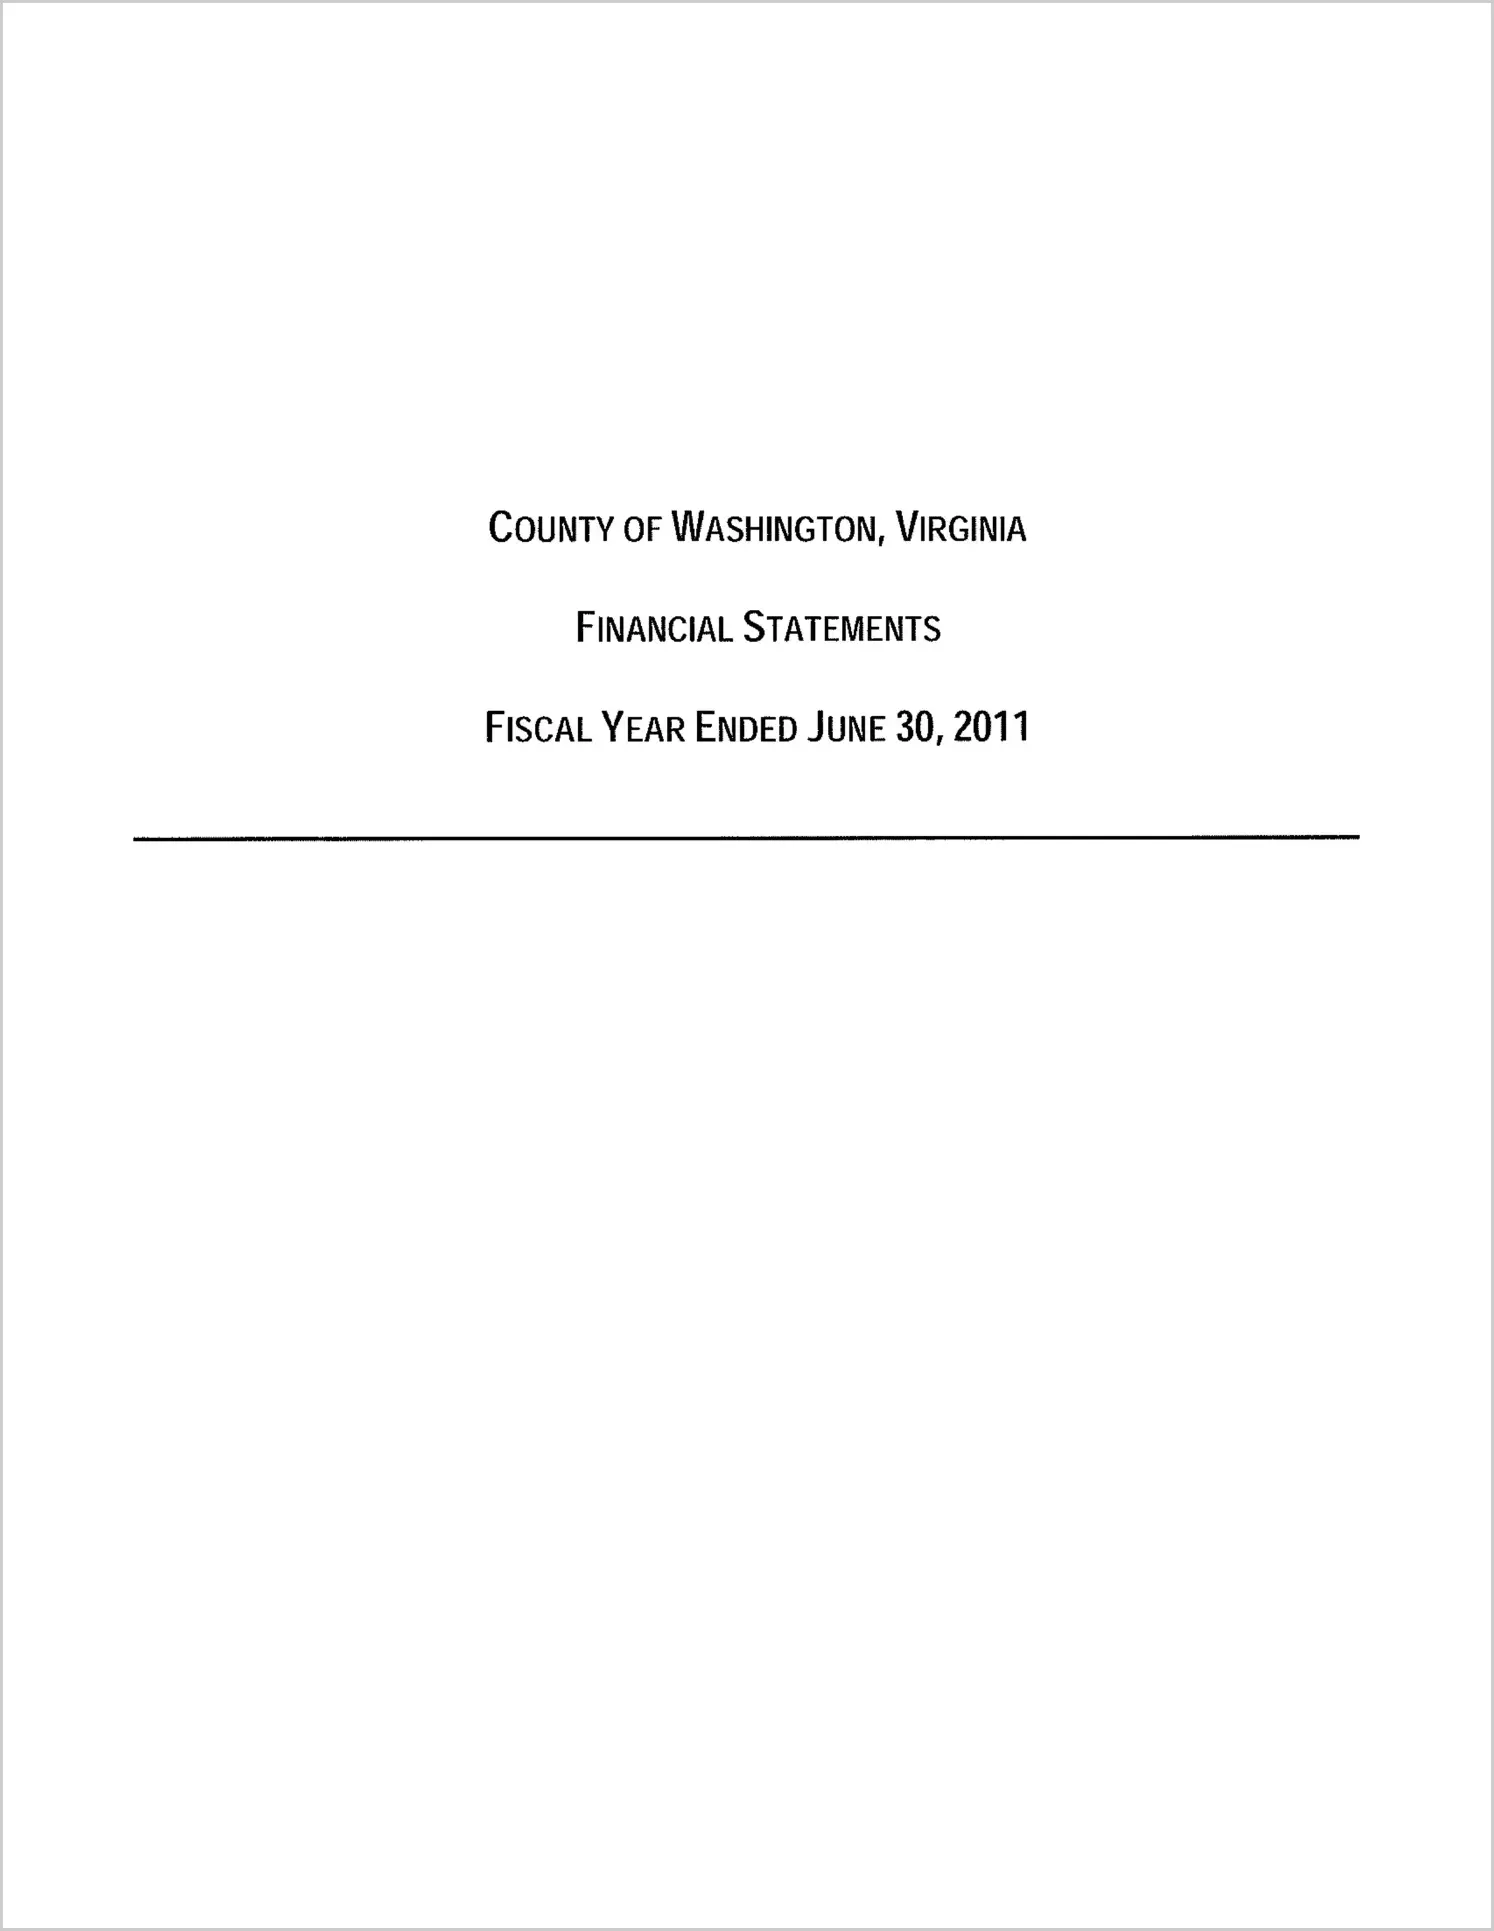 2011 Annual Financial Report for County of Washington